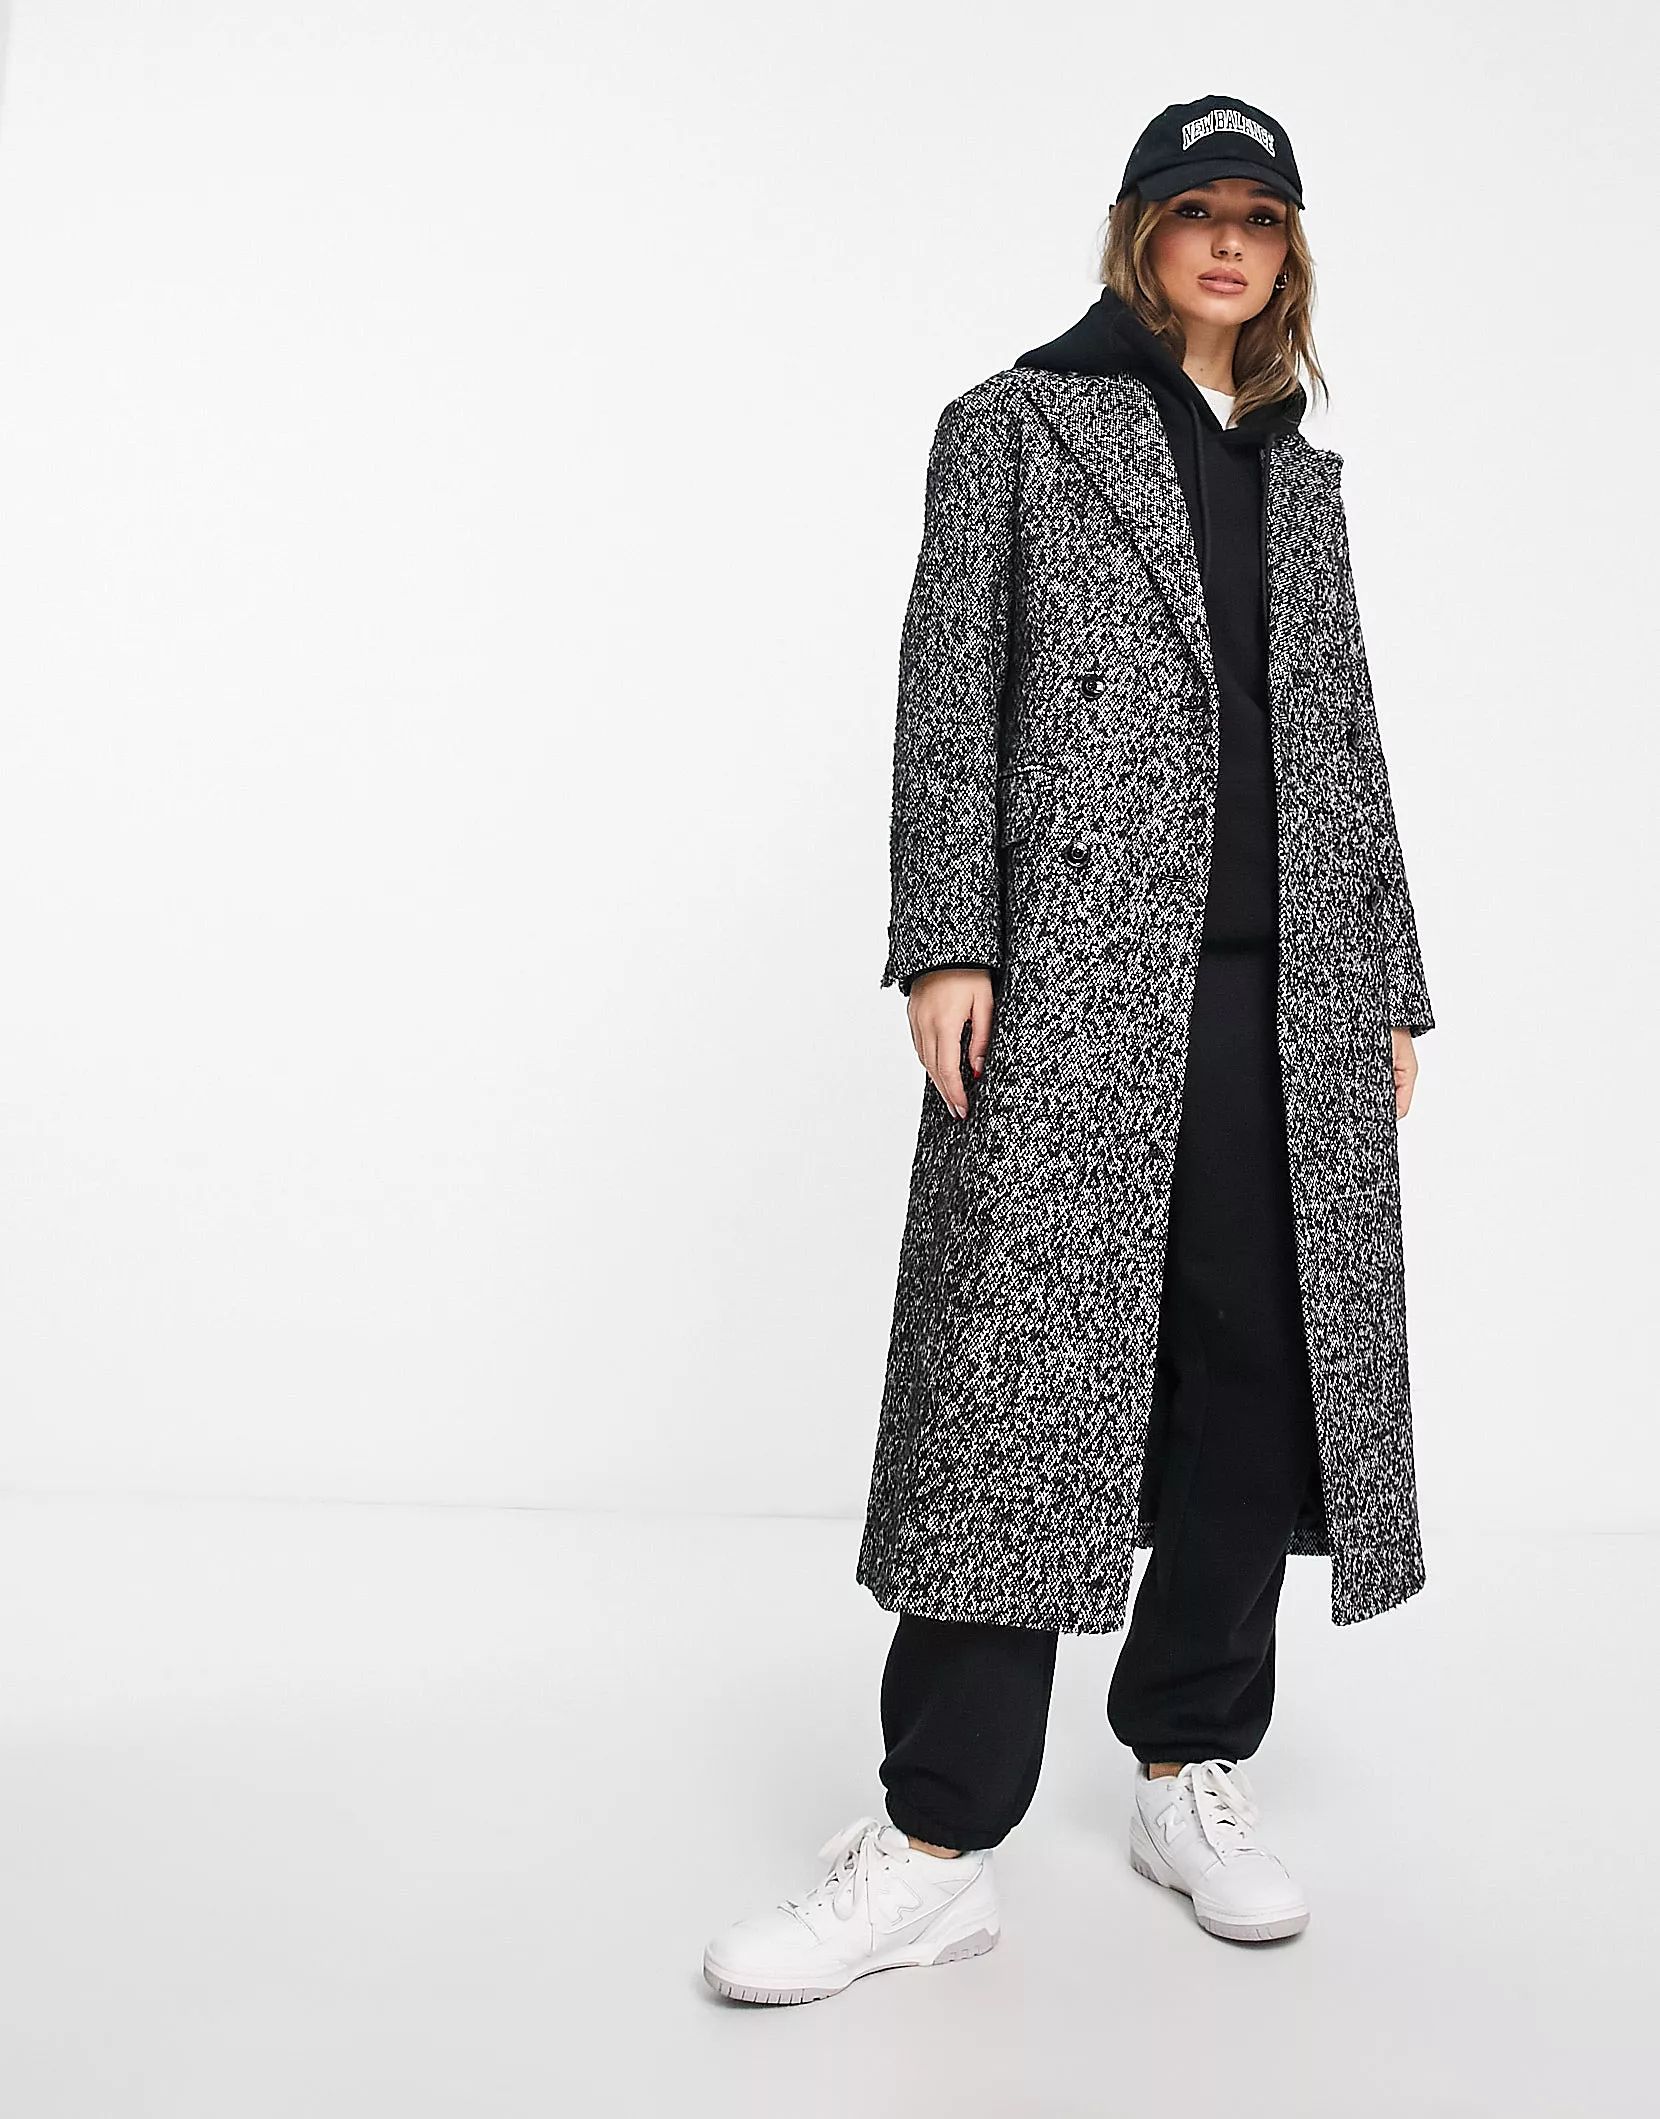 Mango tailored long coat in black and white speck | ASOS (Global)